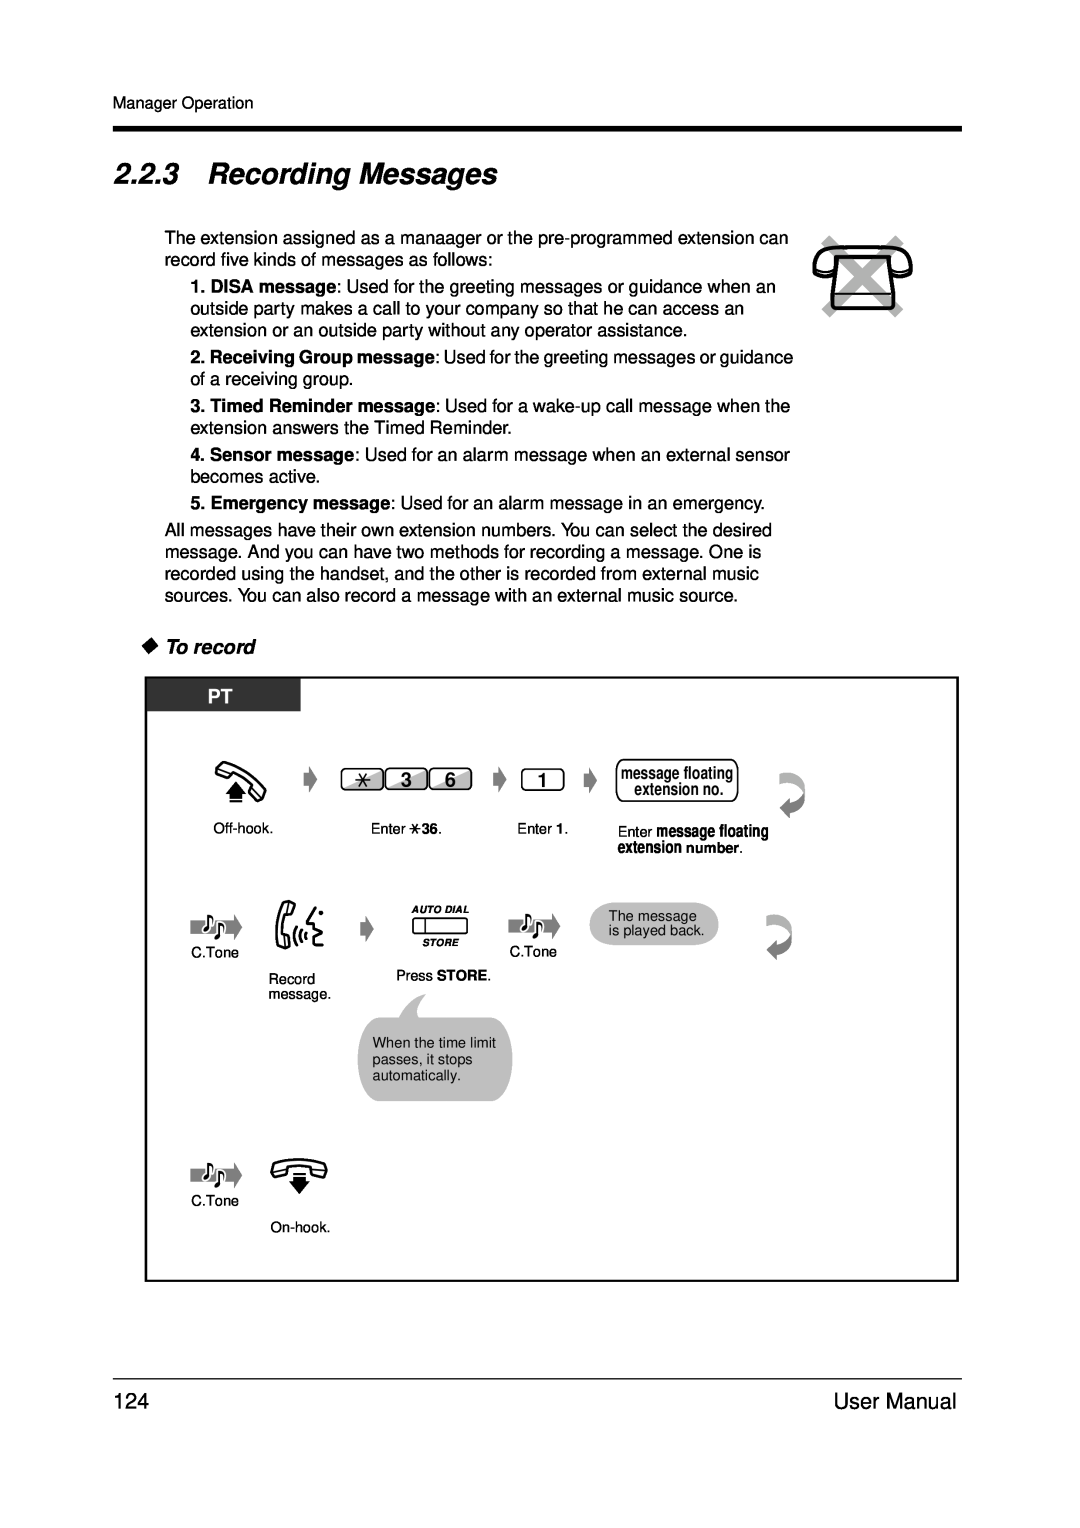 Panasonic KX-TDA200 user manual 2.2.3Recording Messages, To record, message floating, extension no 